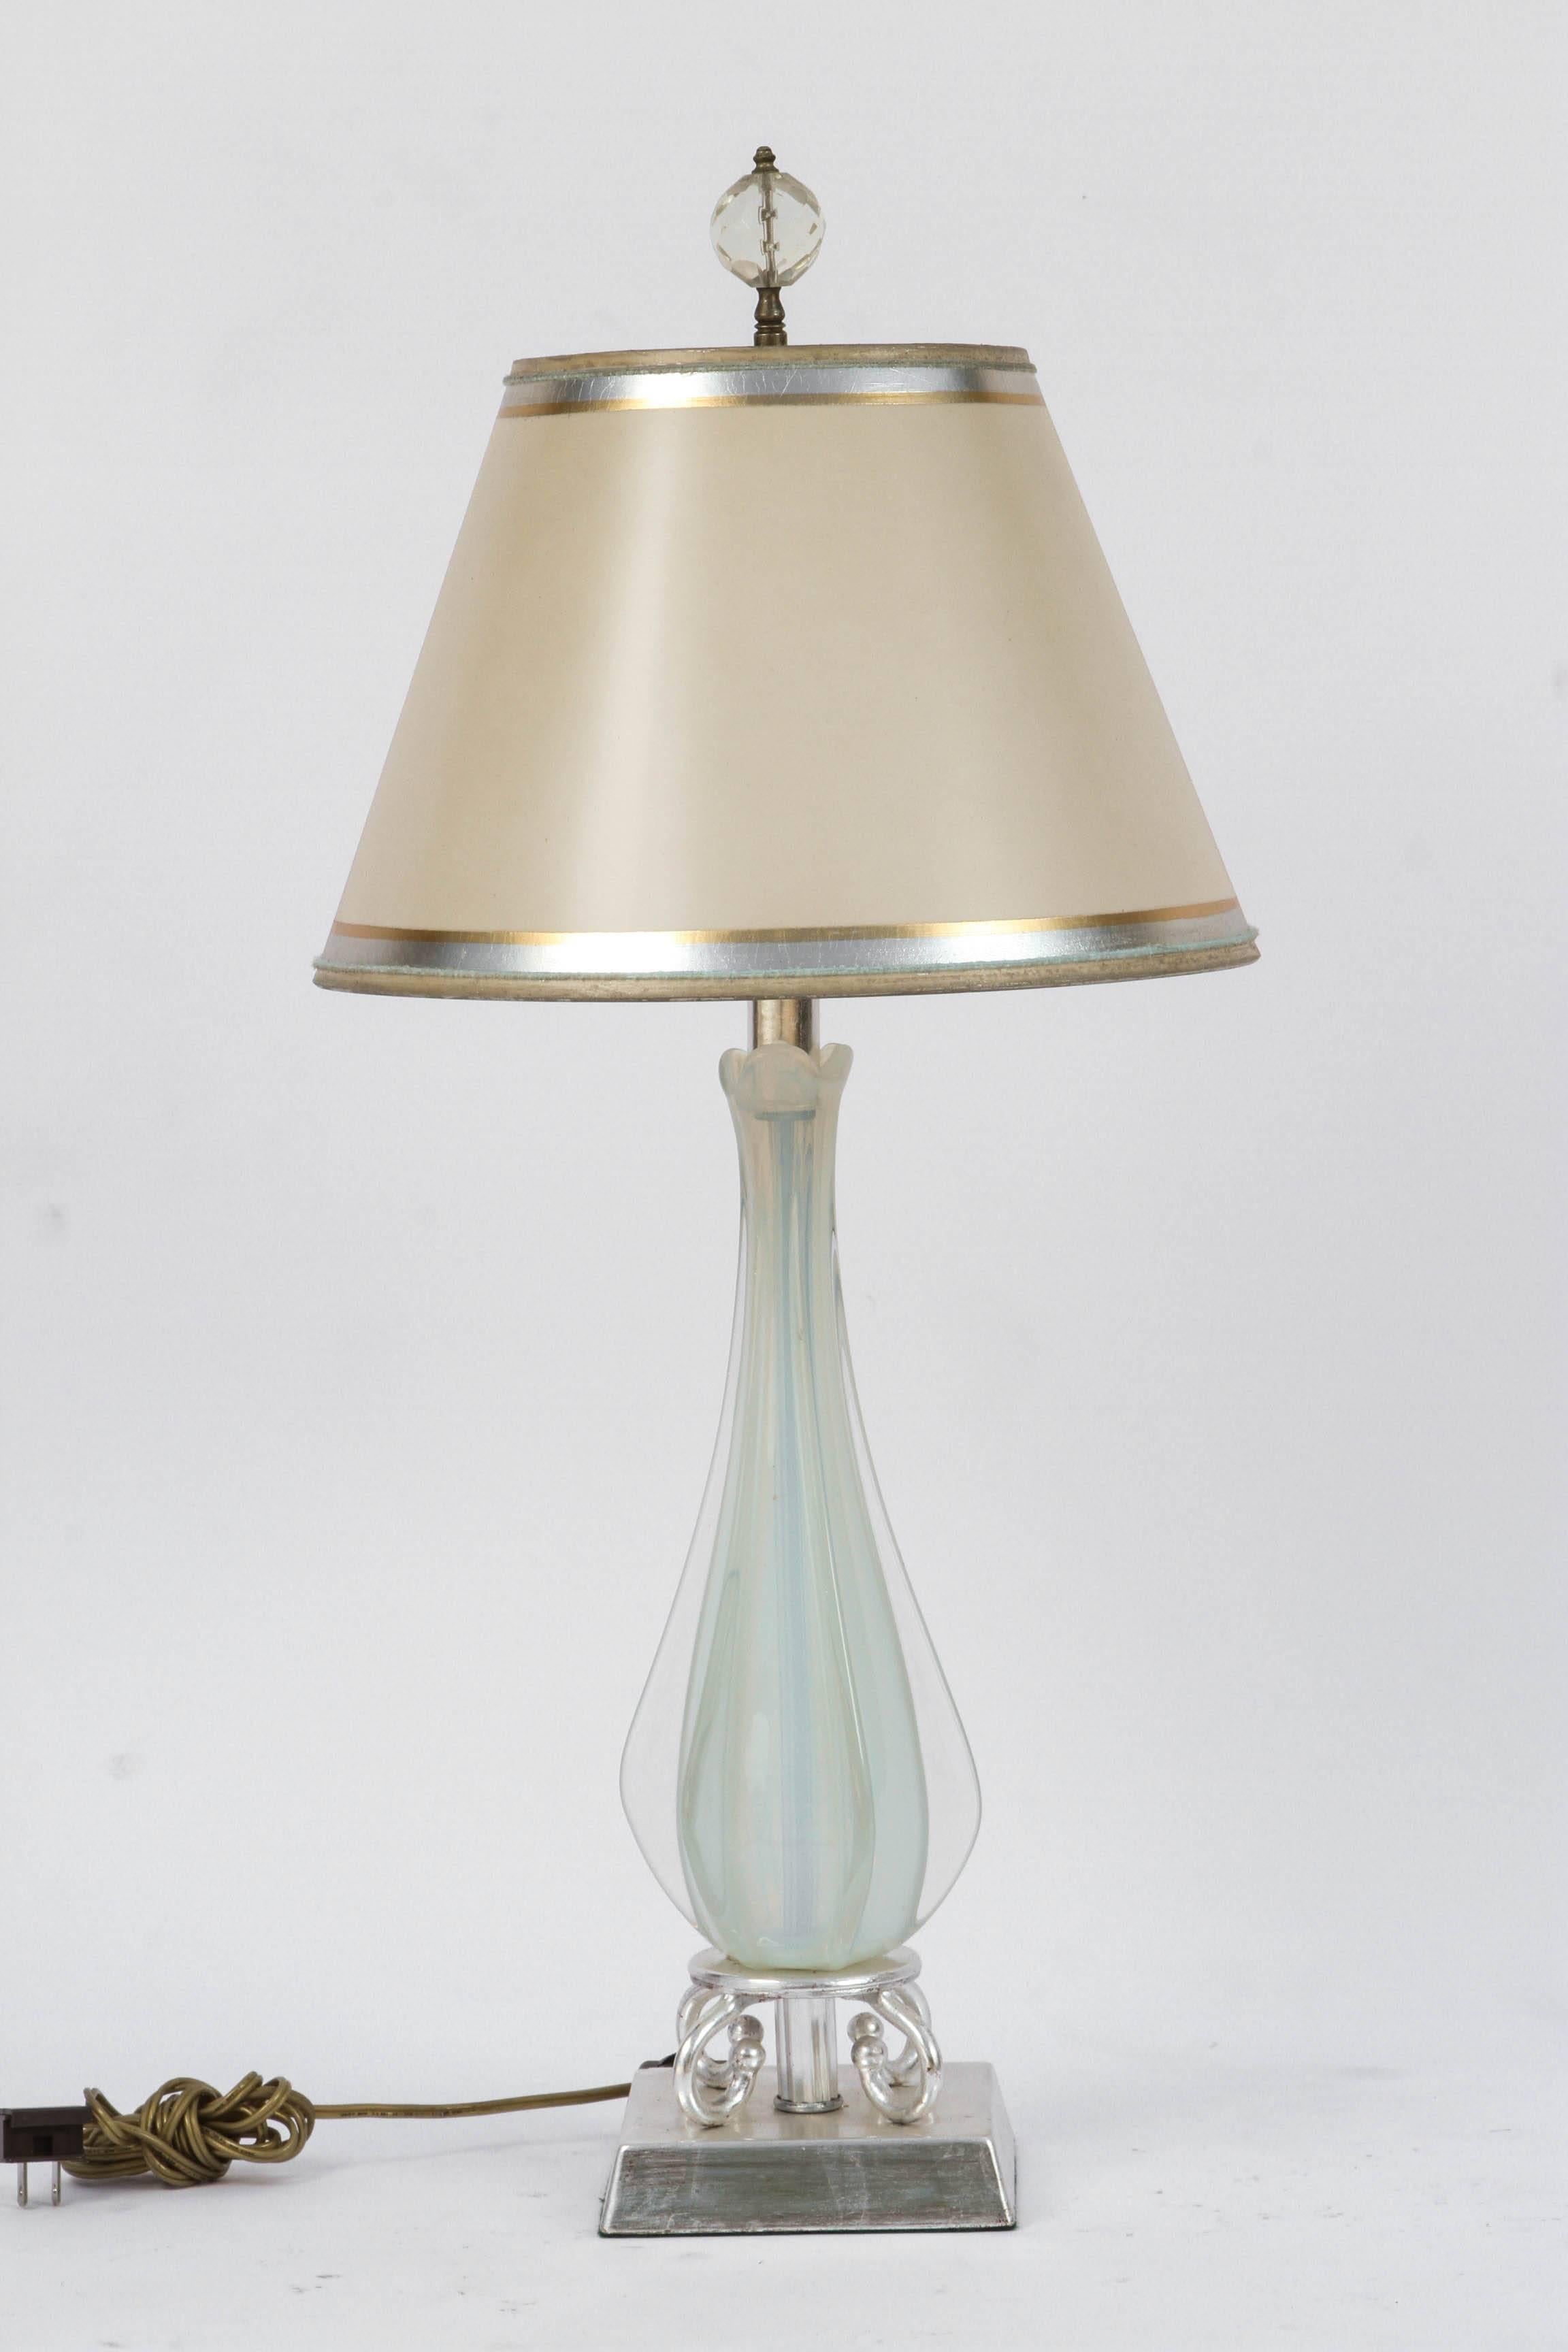 Pair of Mid-Century opaline and clear Italian Murano lamps on original bases that have been recently silver leafed. The handmade shades are included.